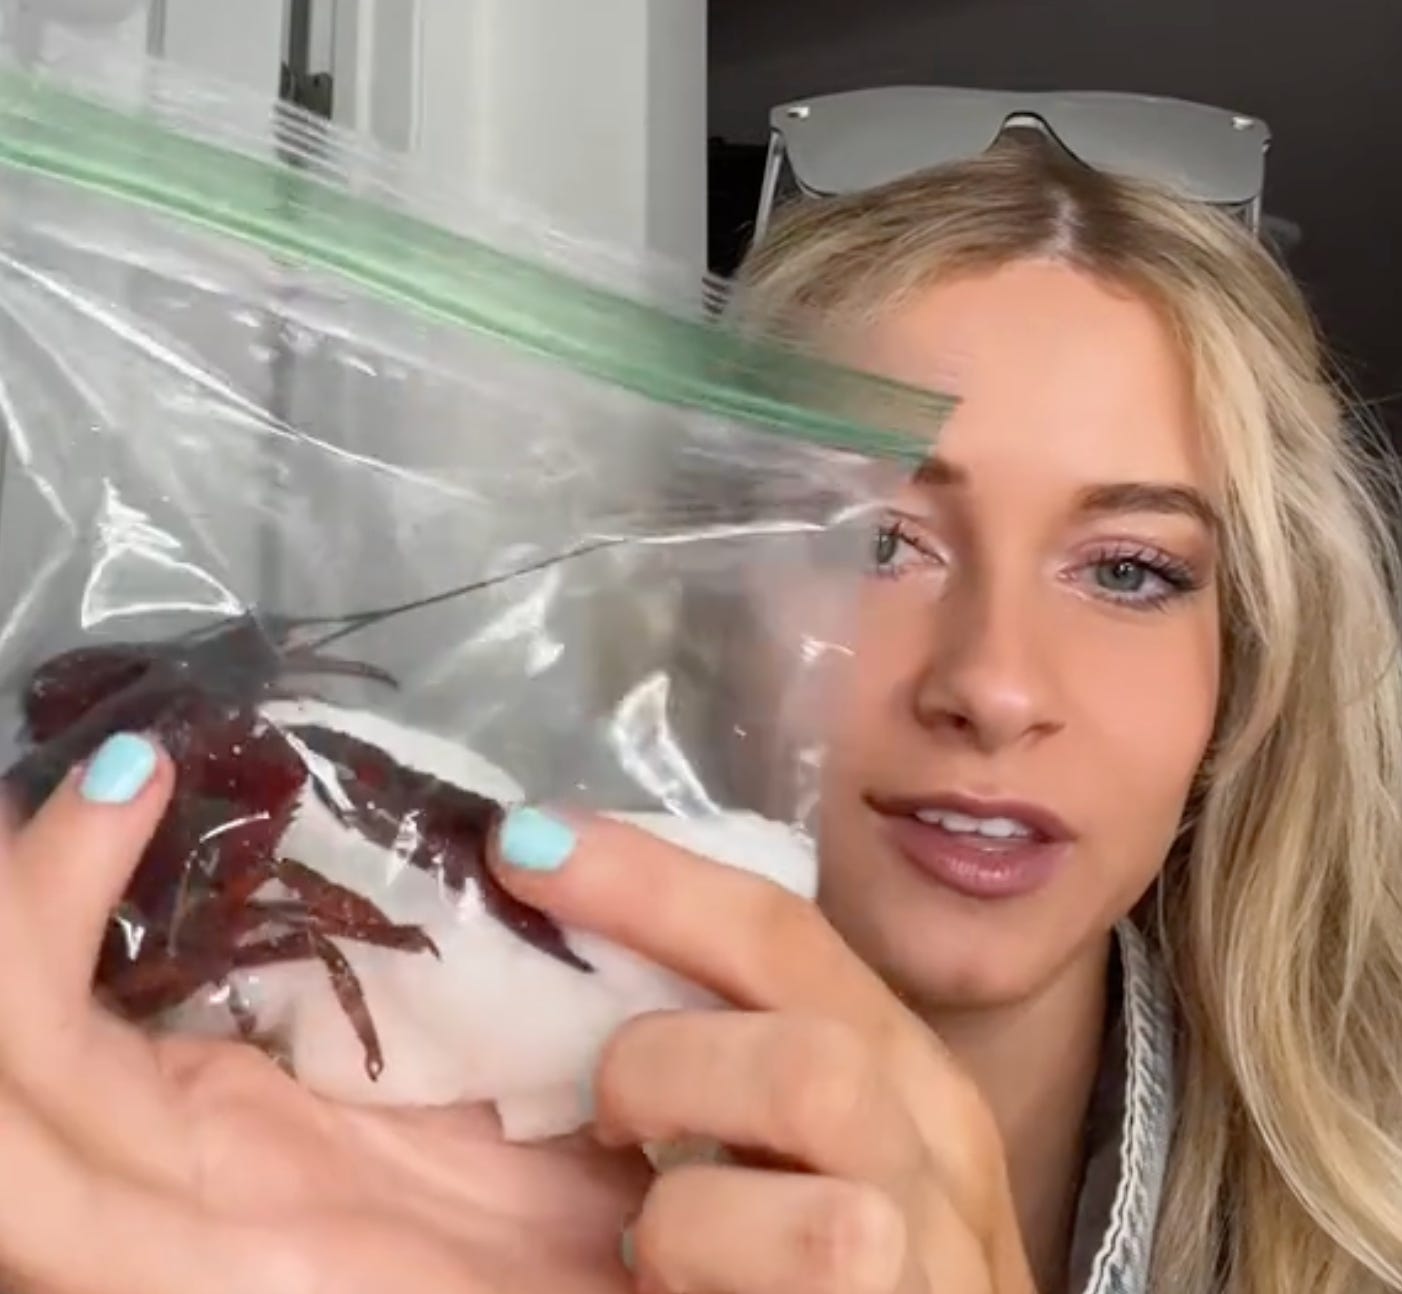 A young blonde woman holds up a ziploc bag containing a wet paper towel and a live crawfish.